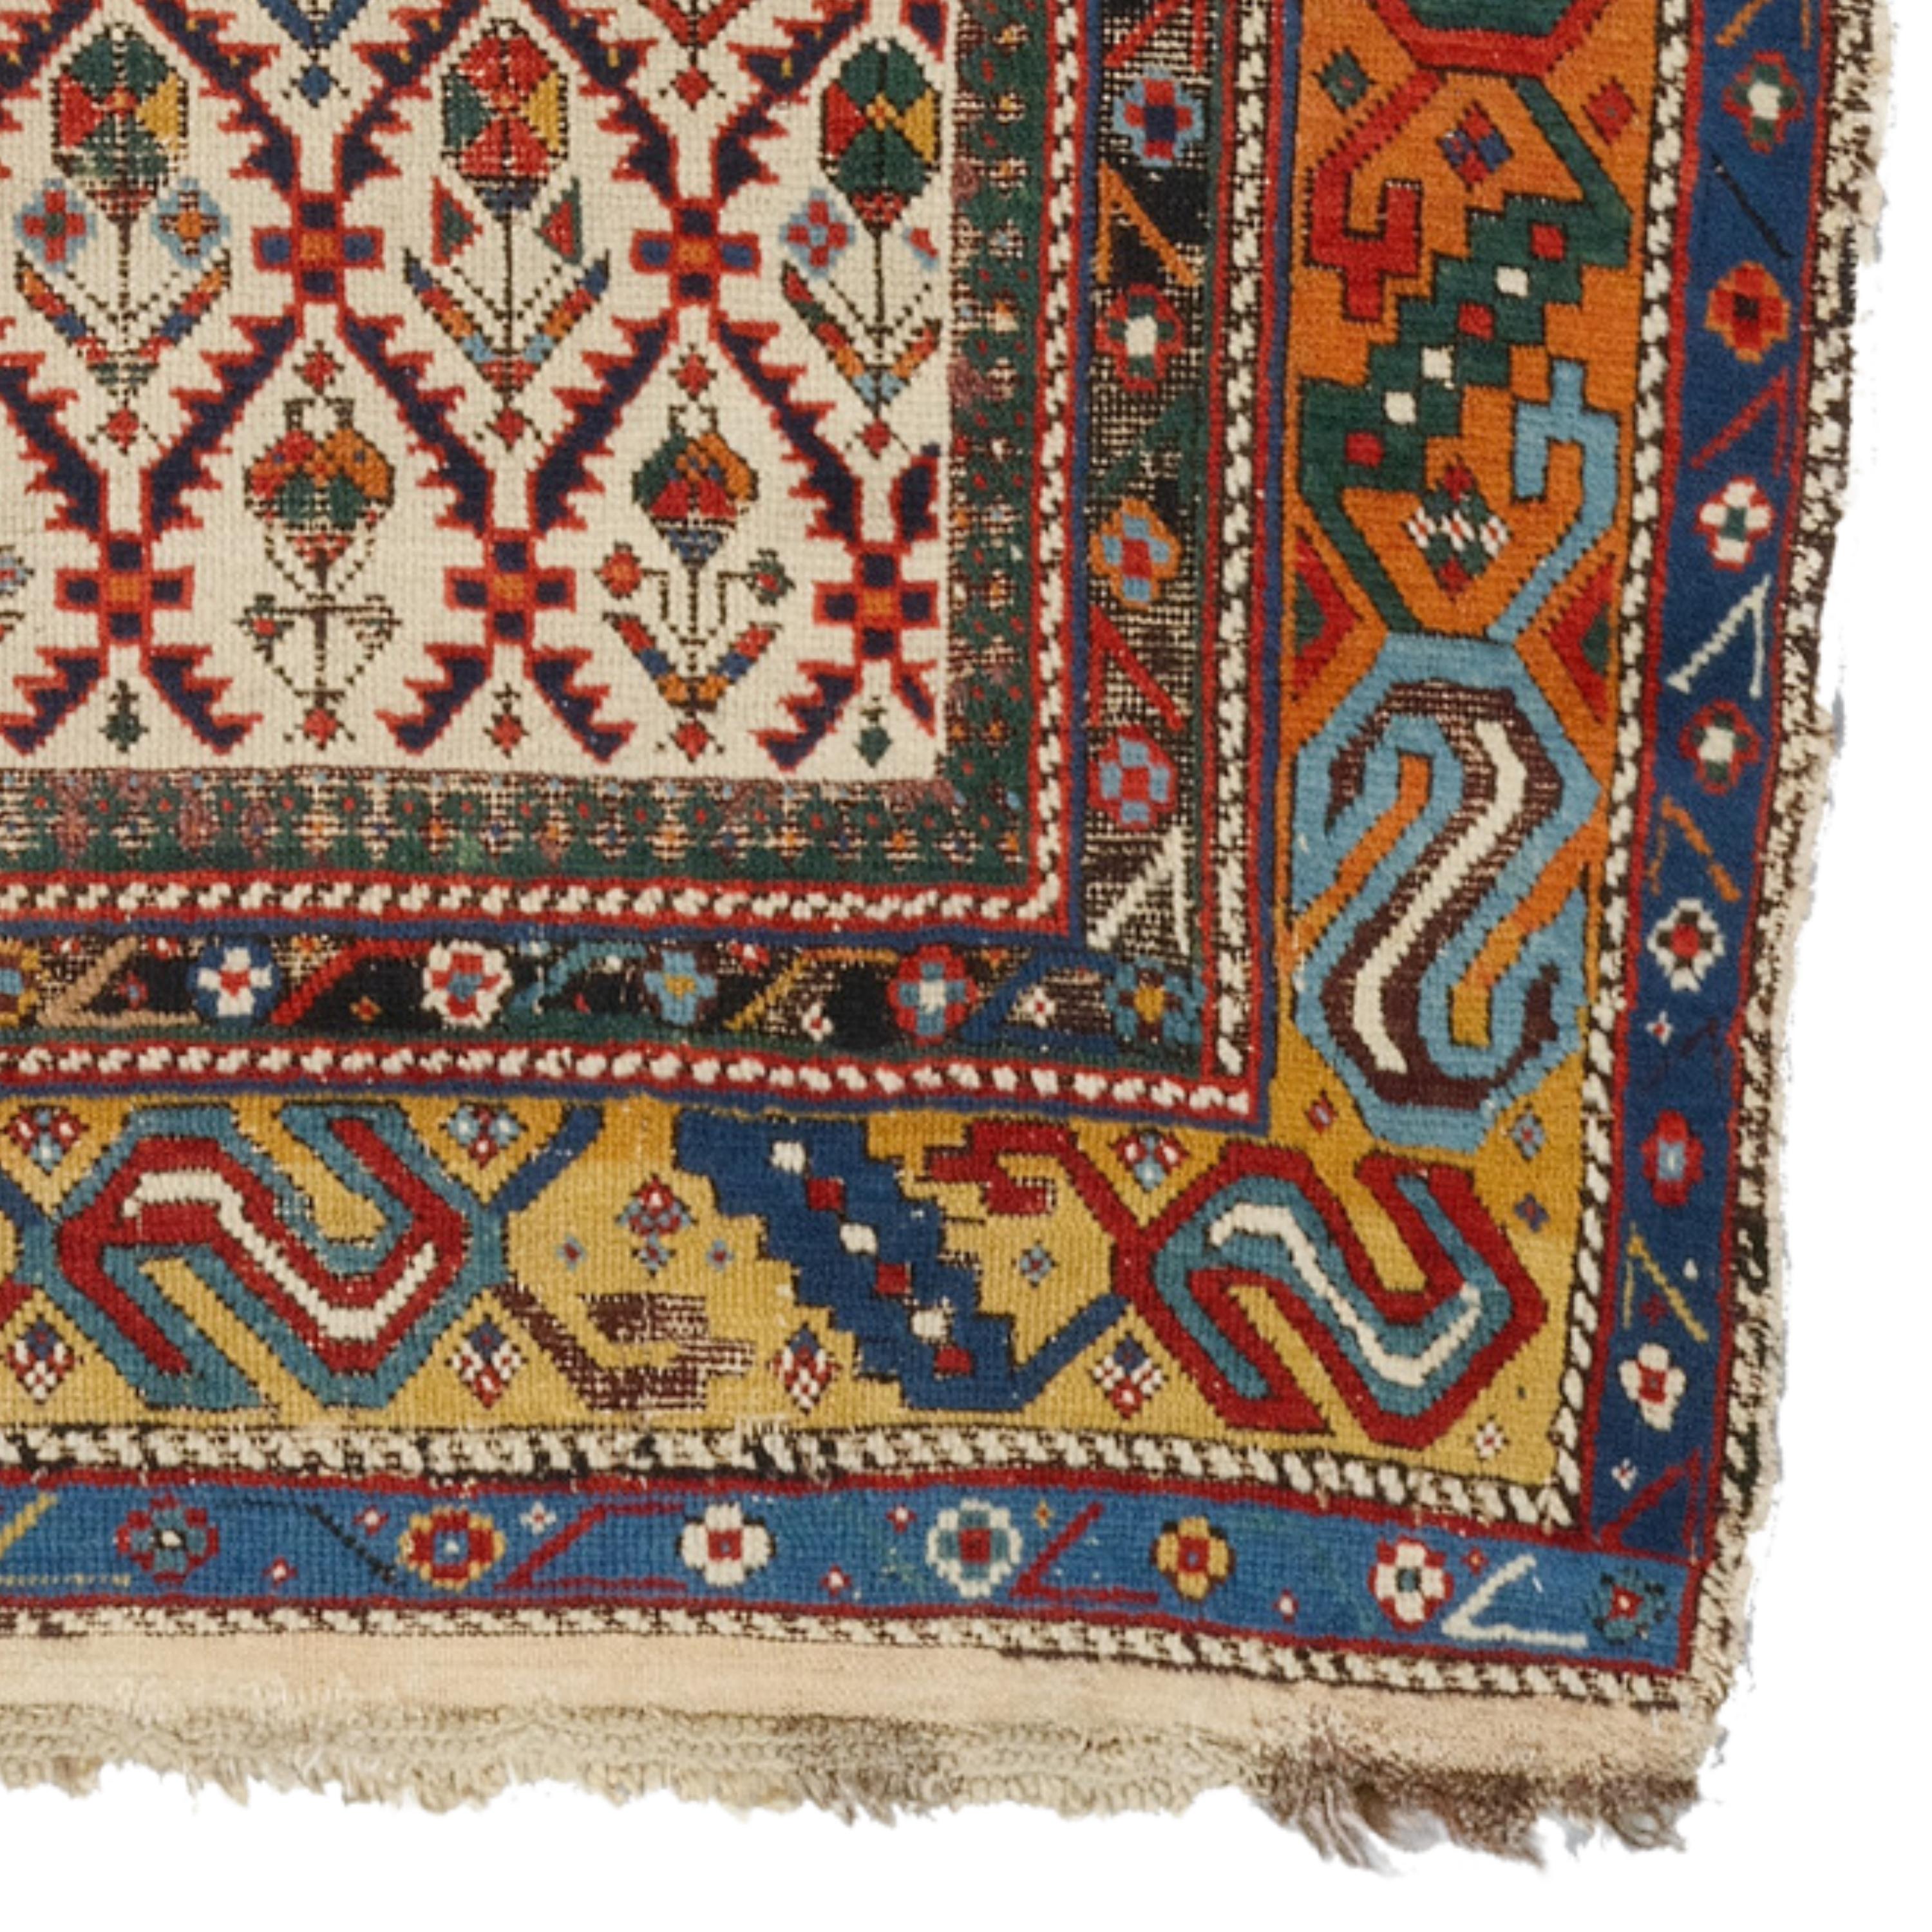 Wool Antique Shirvan Prayer Rug - Late of the 19th Century Shirvan Rug, Antique Rug For Sale